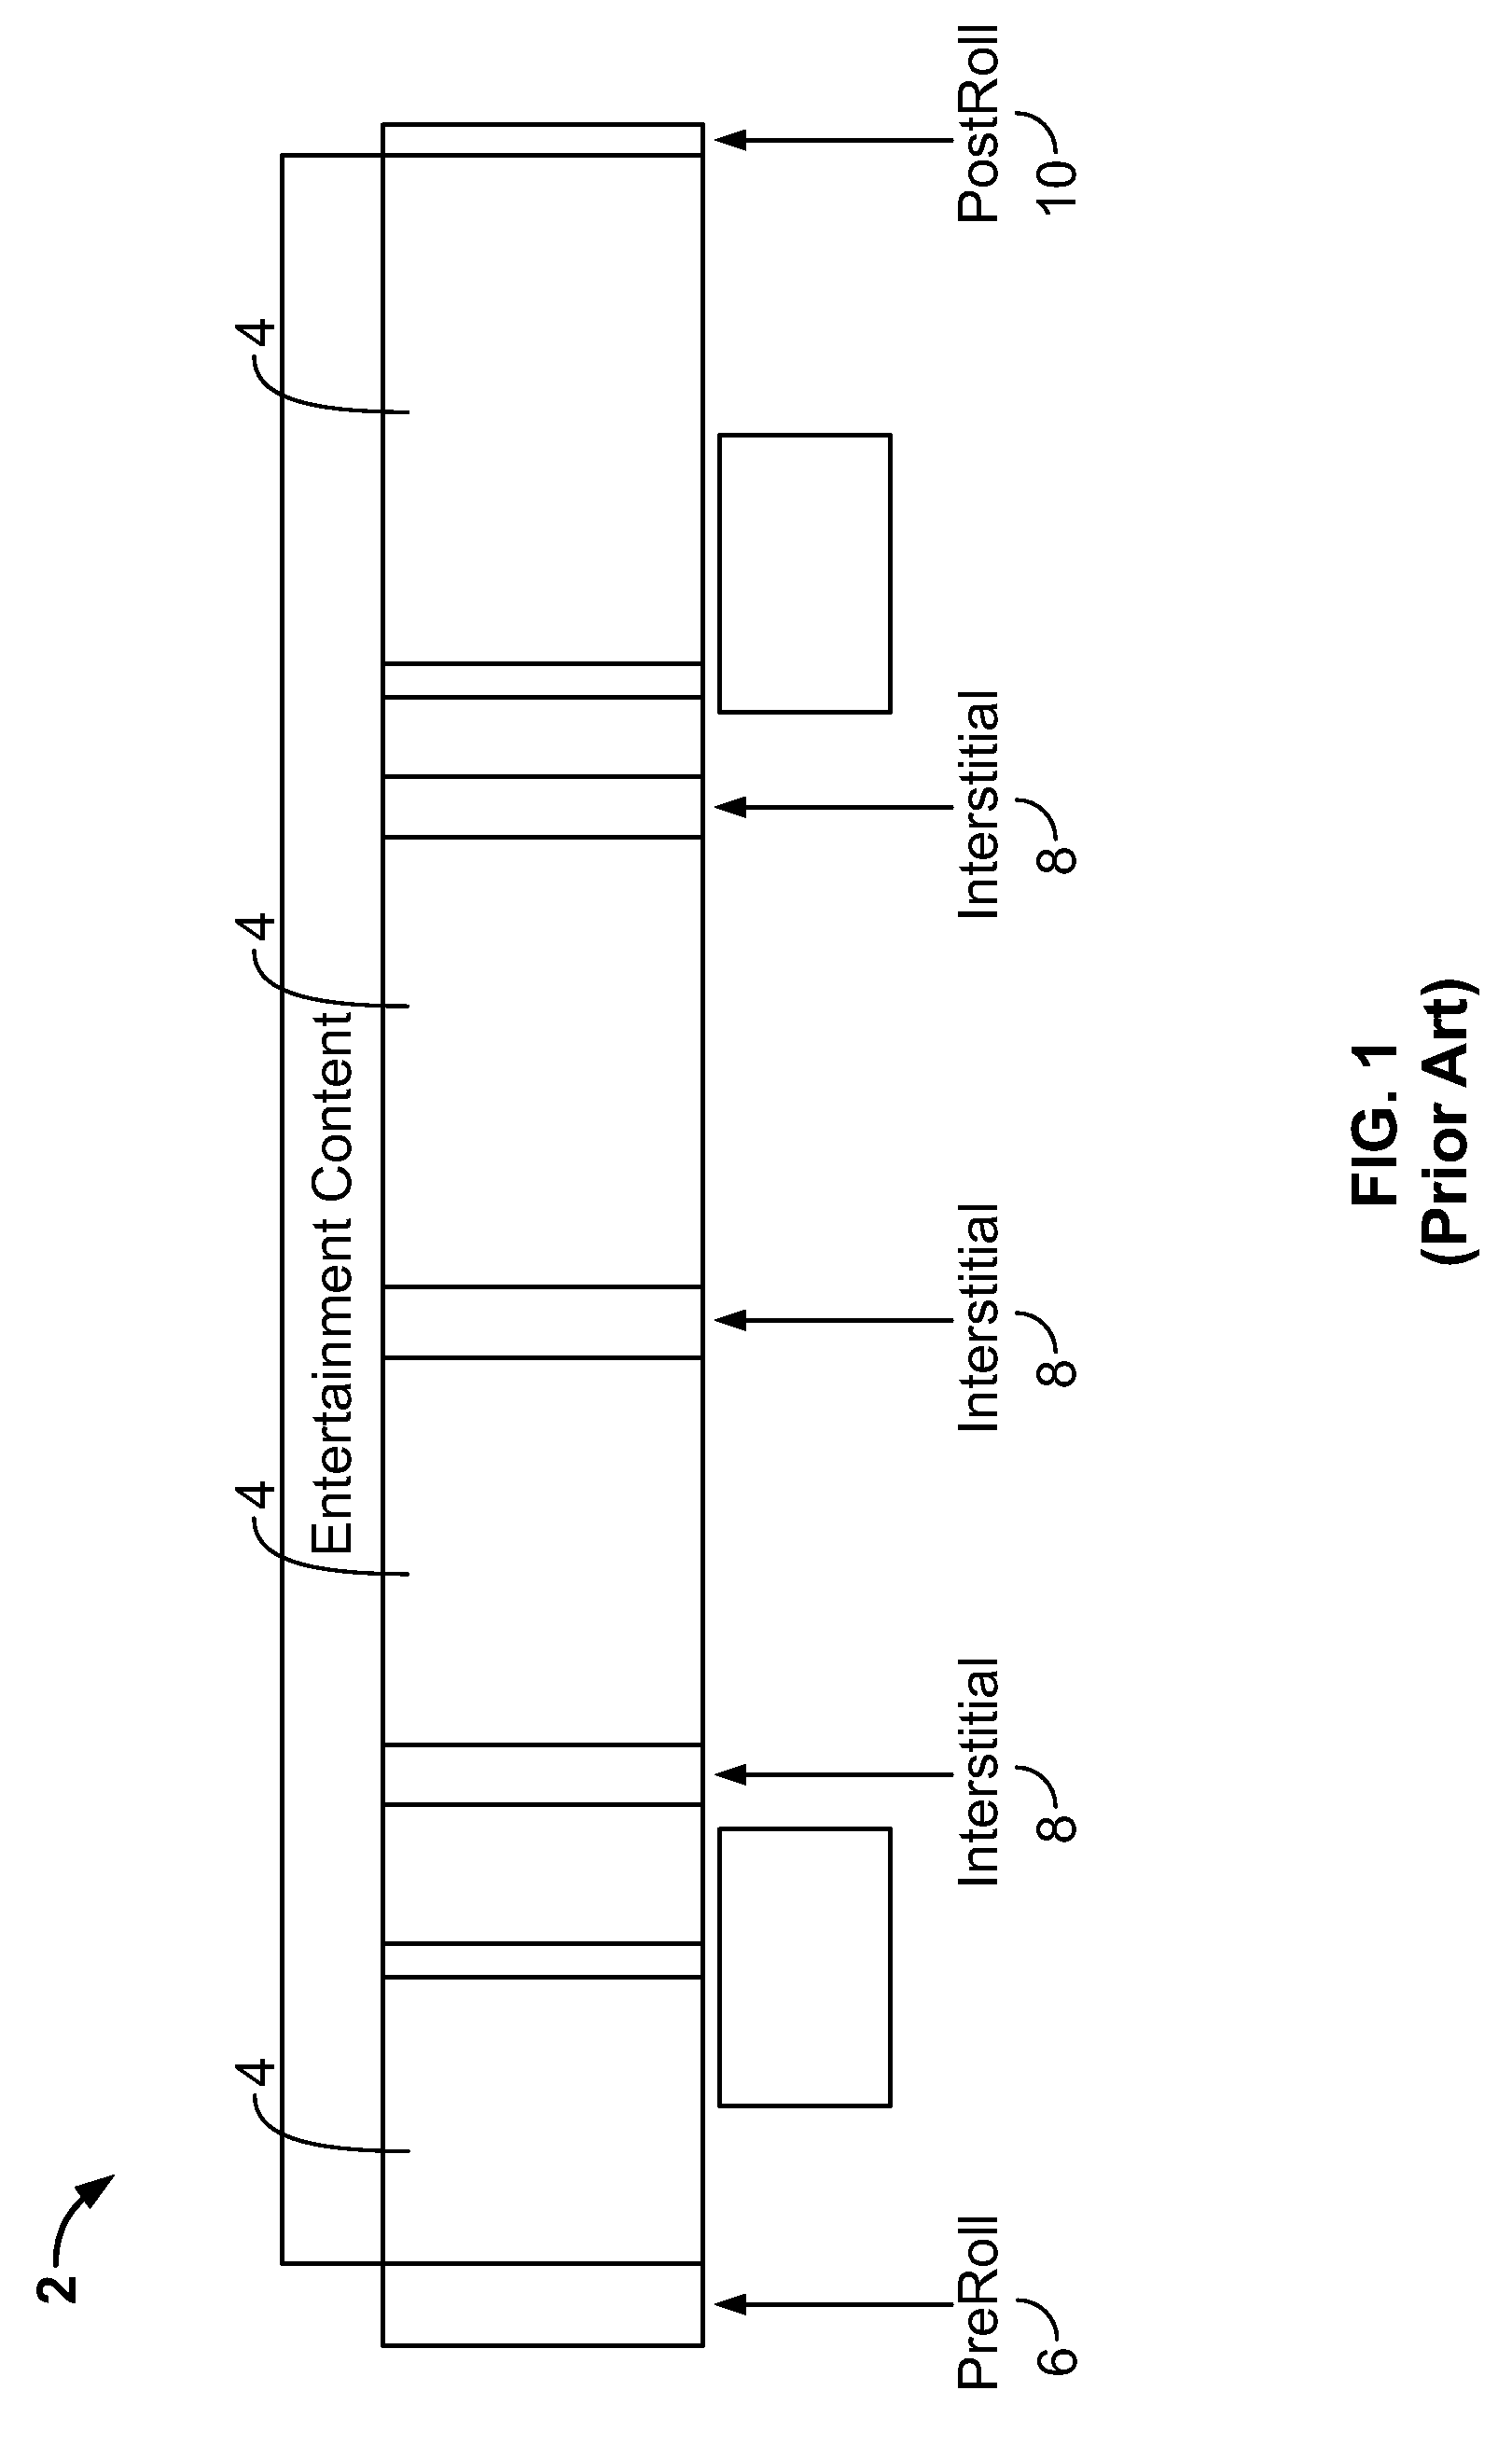 System and method for enabling content providers to identify advertising opportunities